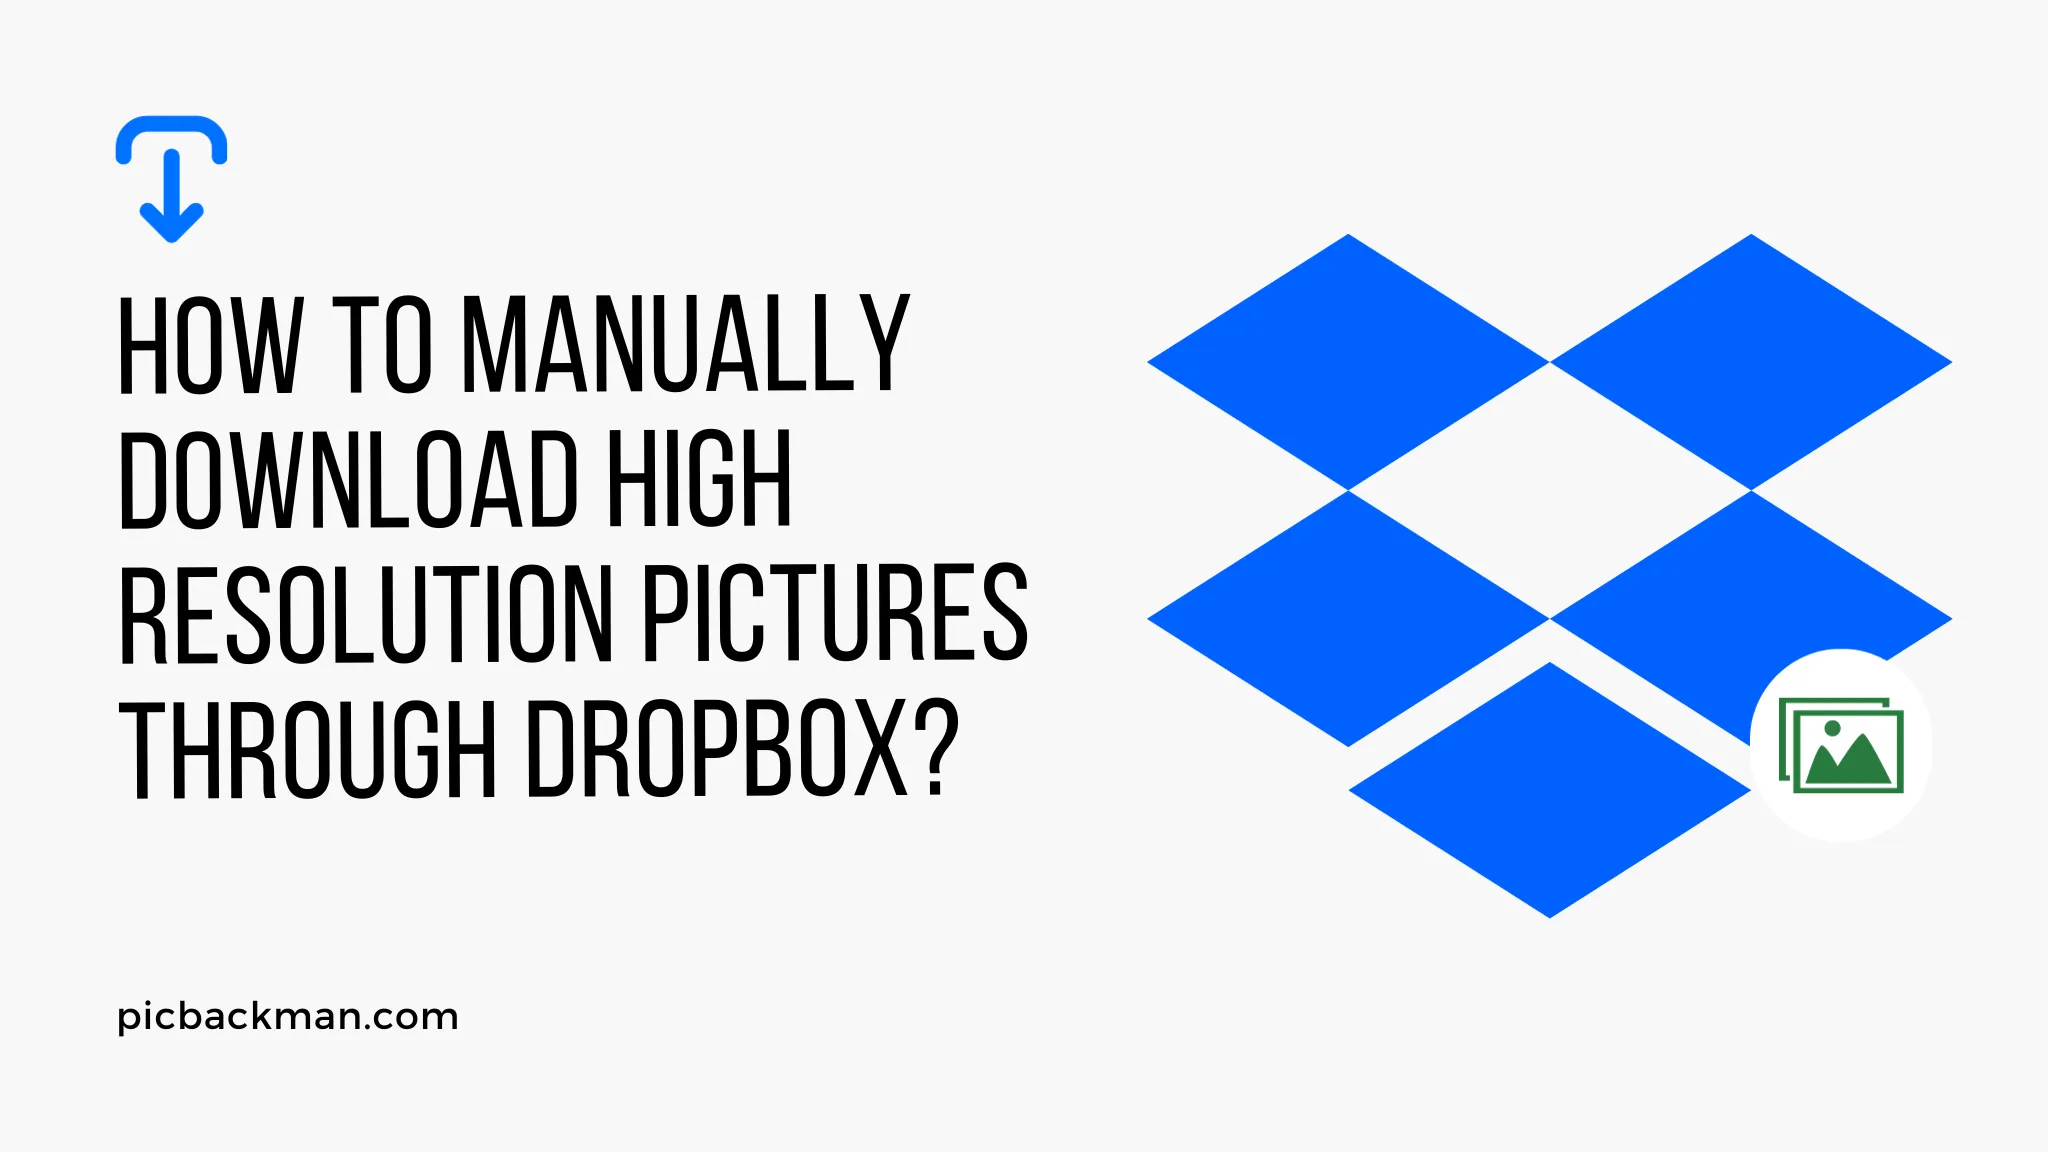 How to Manually Download High Resolution Pictures through Dropbox?